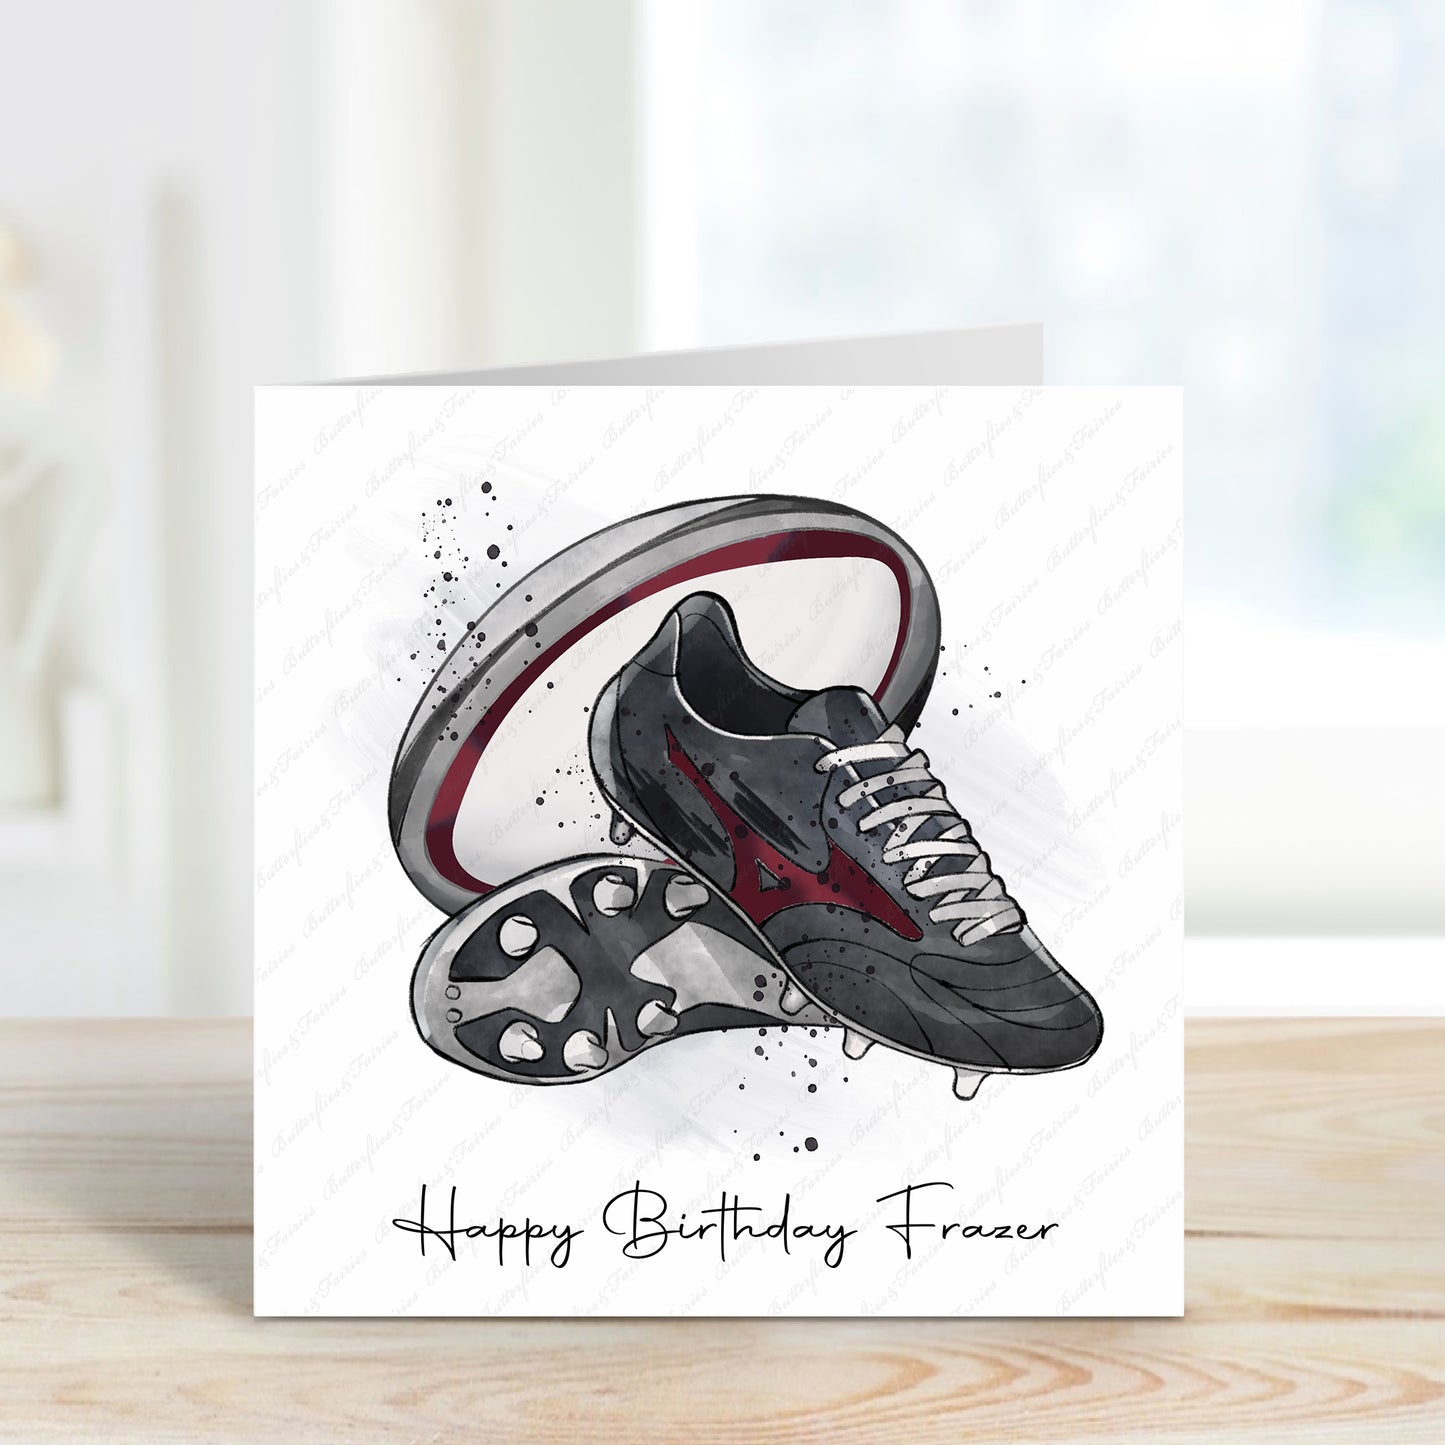 Personalised Rugby Birthday Card - Lots of Colour Options Available